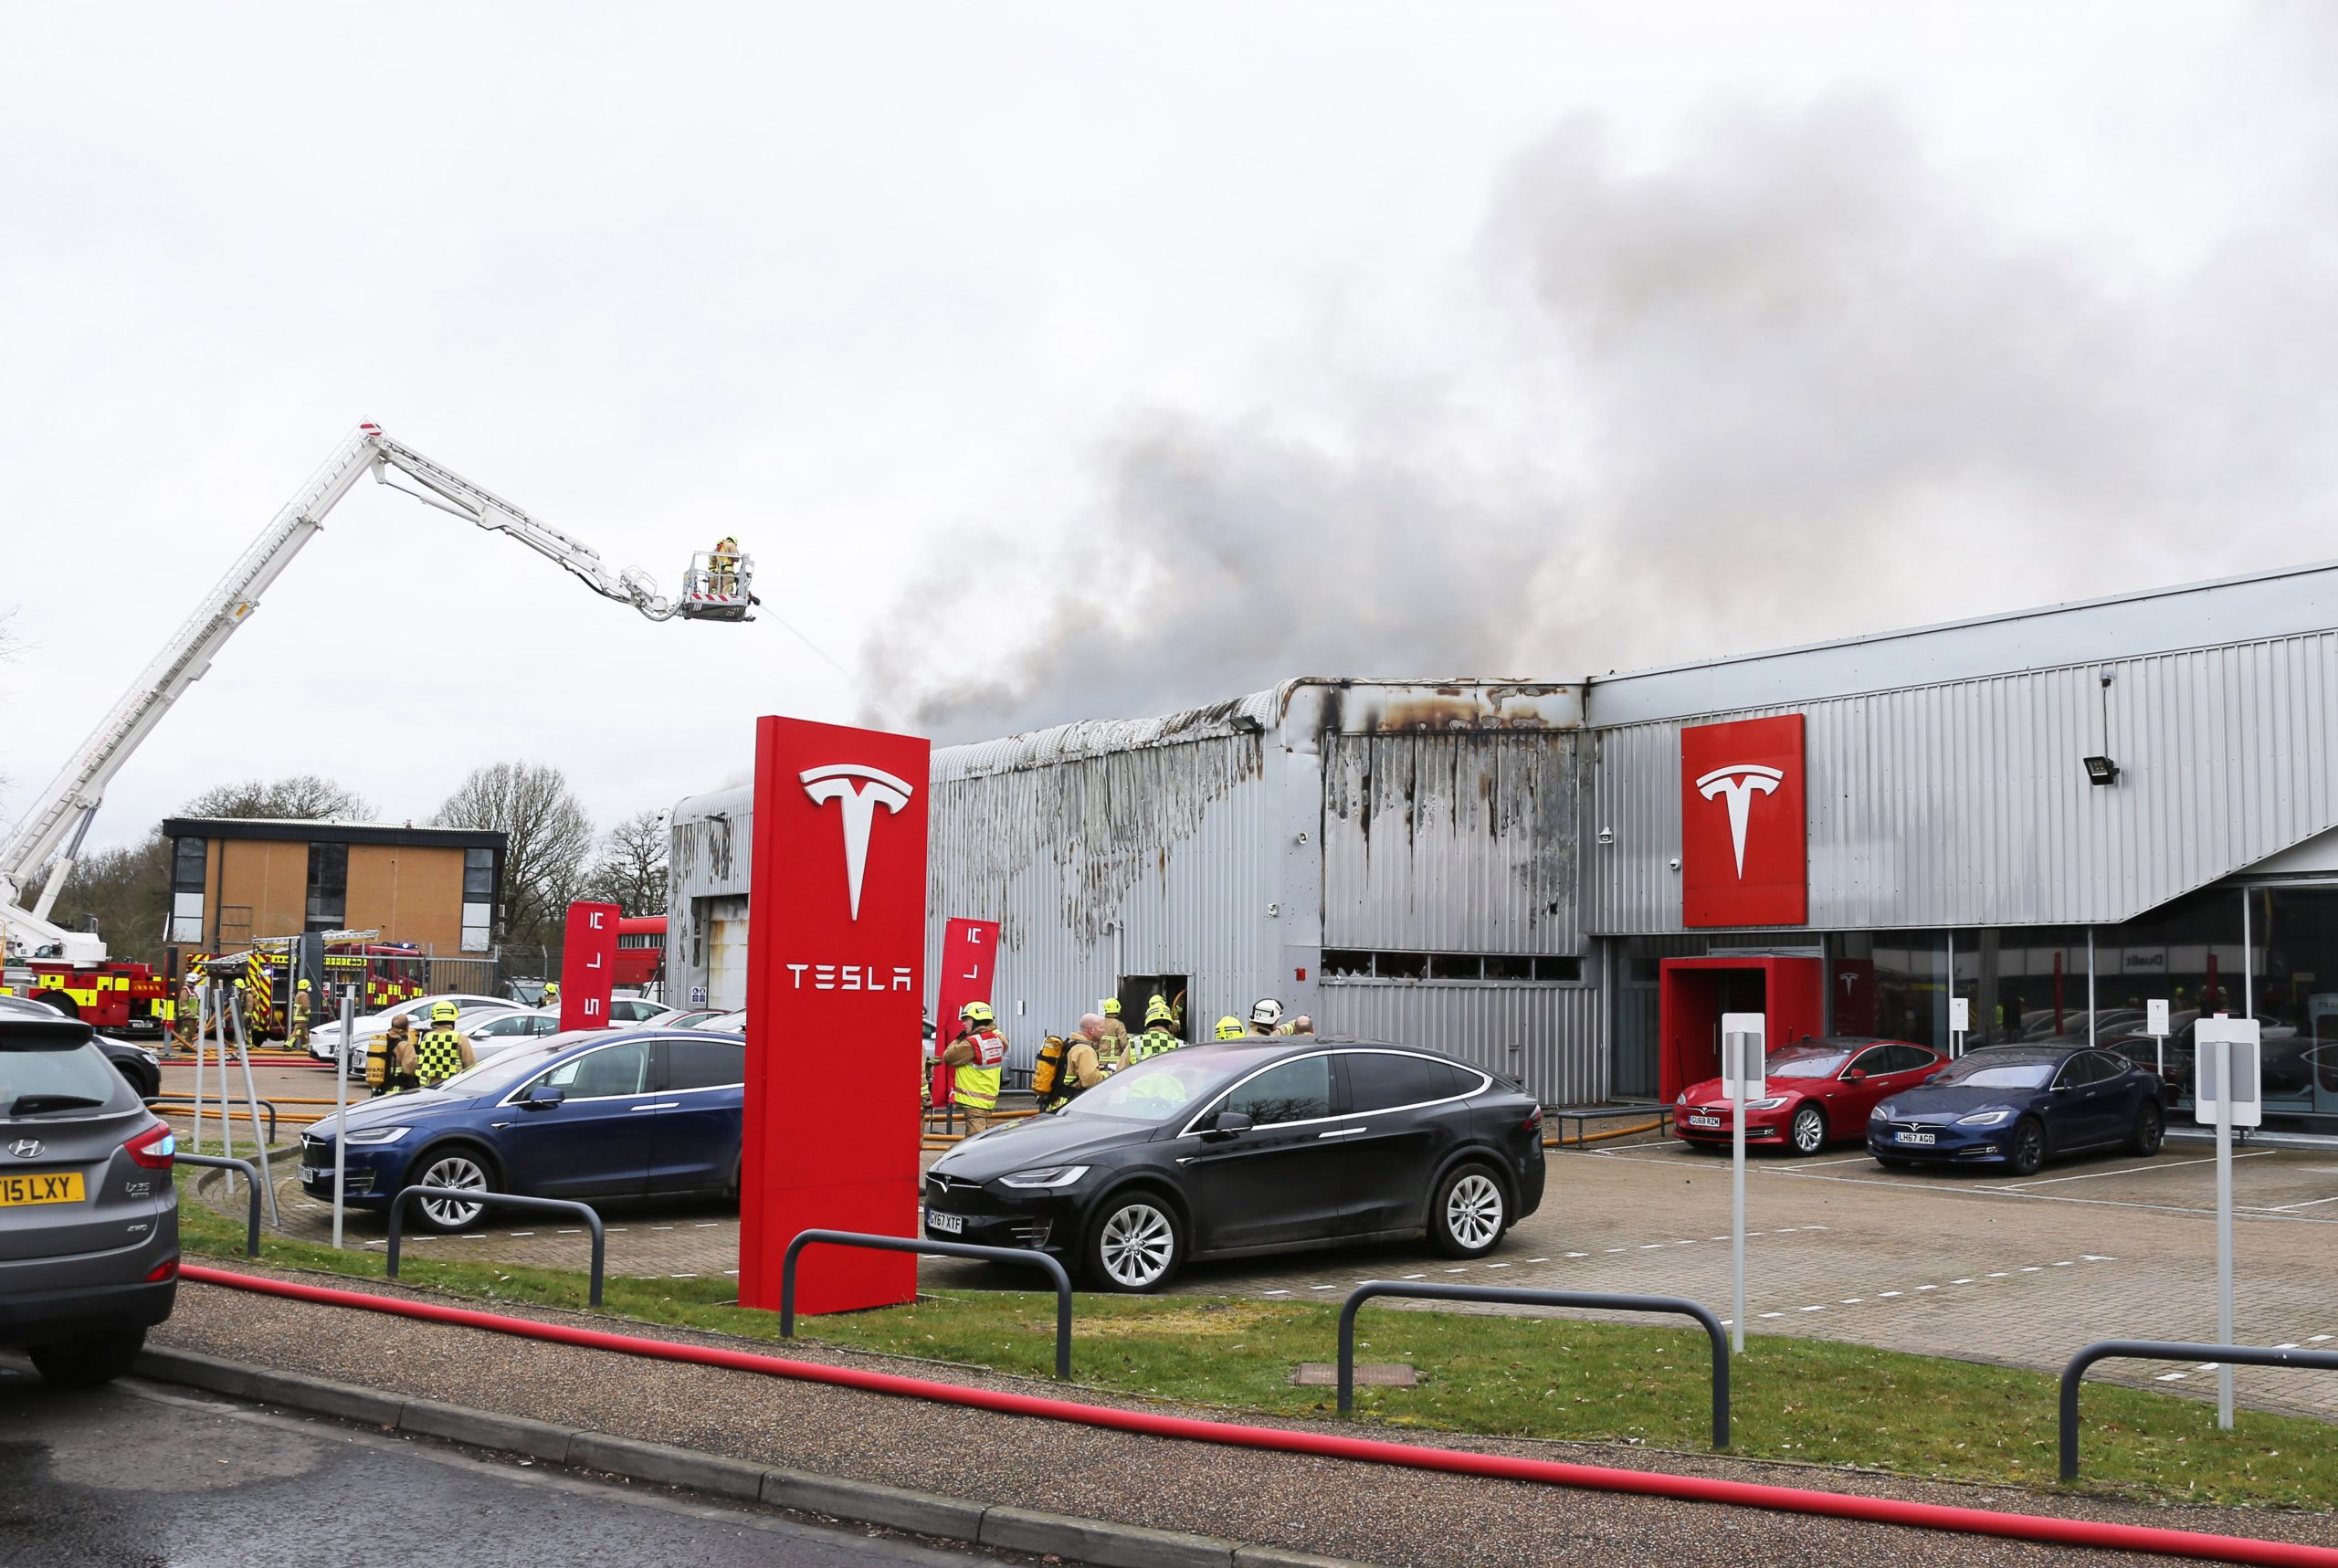 A Tesla dealer in the UK after a fire